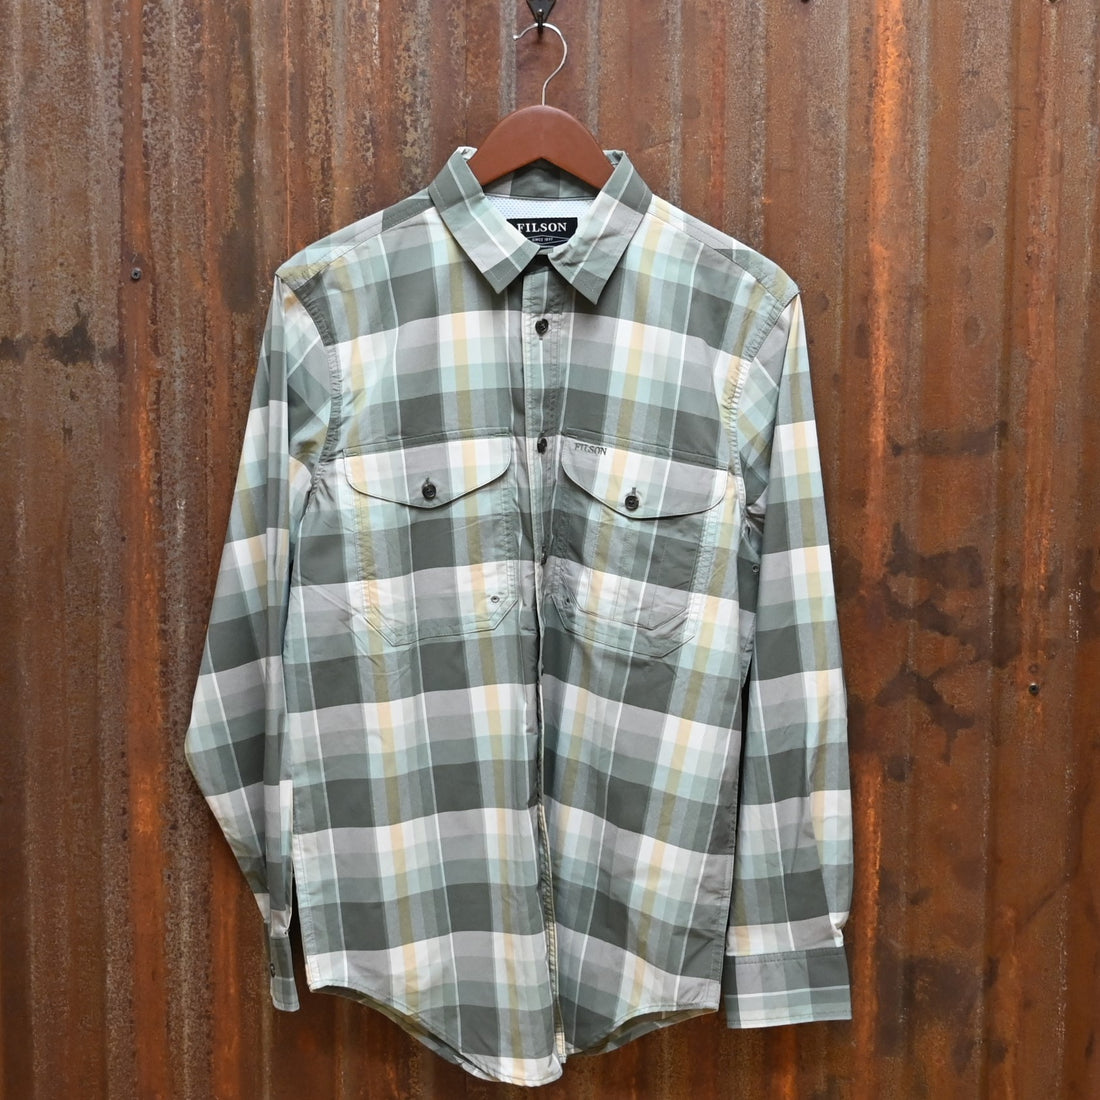 Filson Twin Lakes Sports Shirt in Olive, White and Gold Plaid by Filson view of front